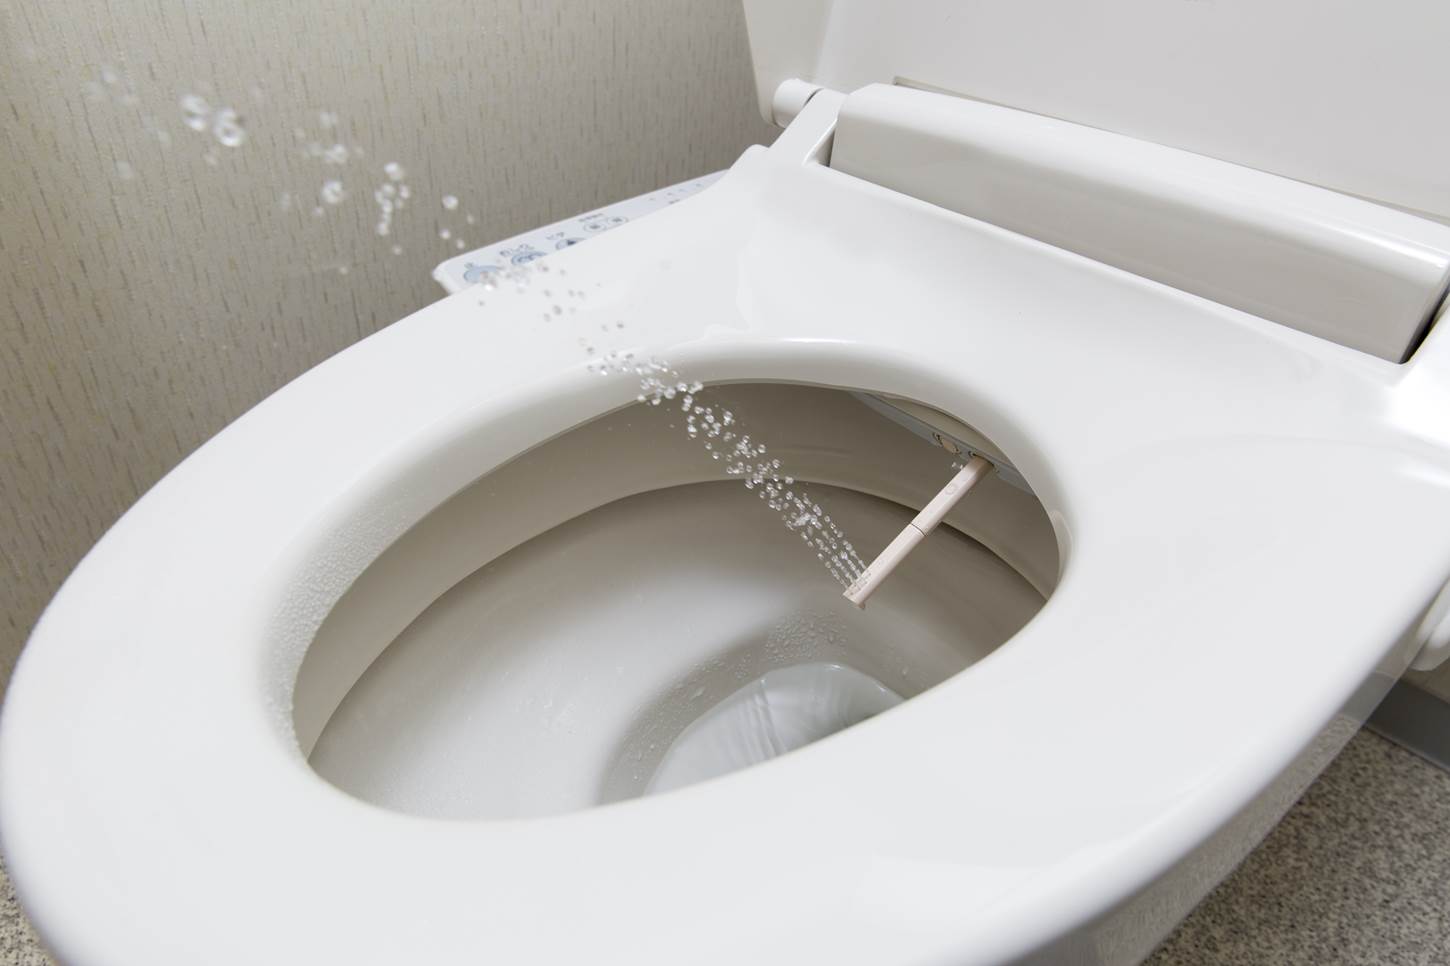 In a Japanese toilet, you press a button and hot water comes out to clean it = Shutterstock